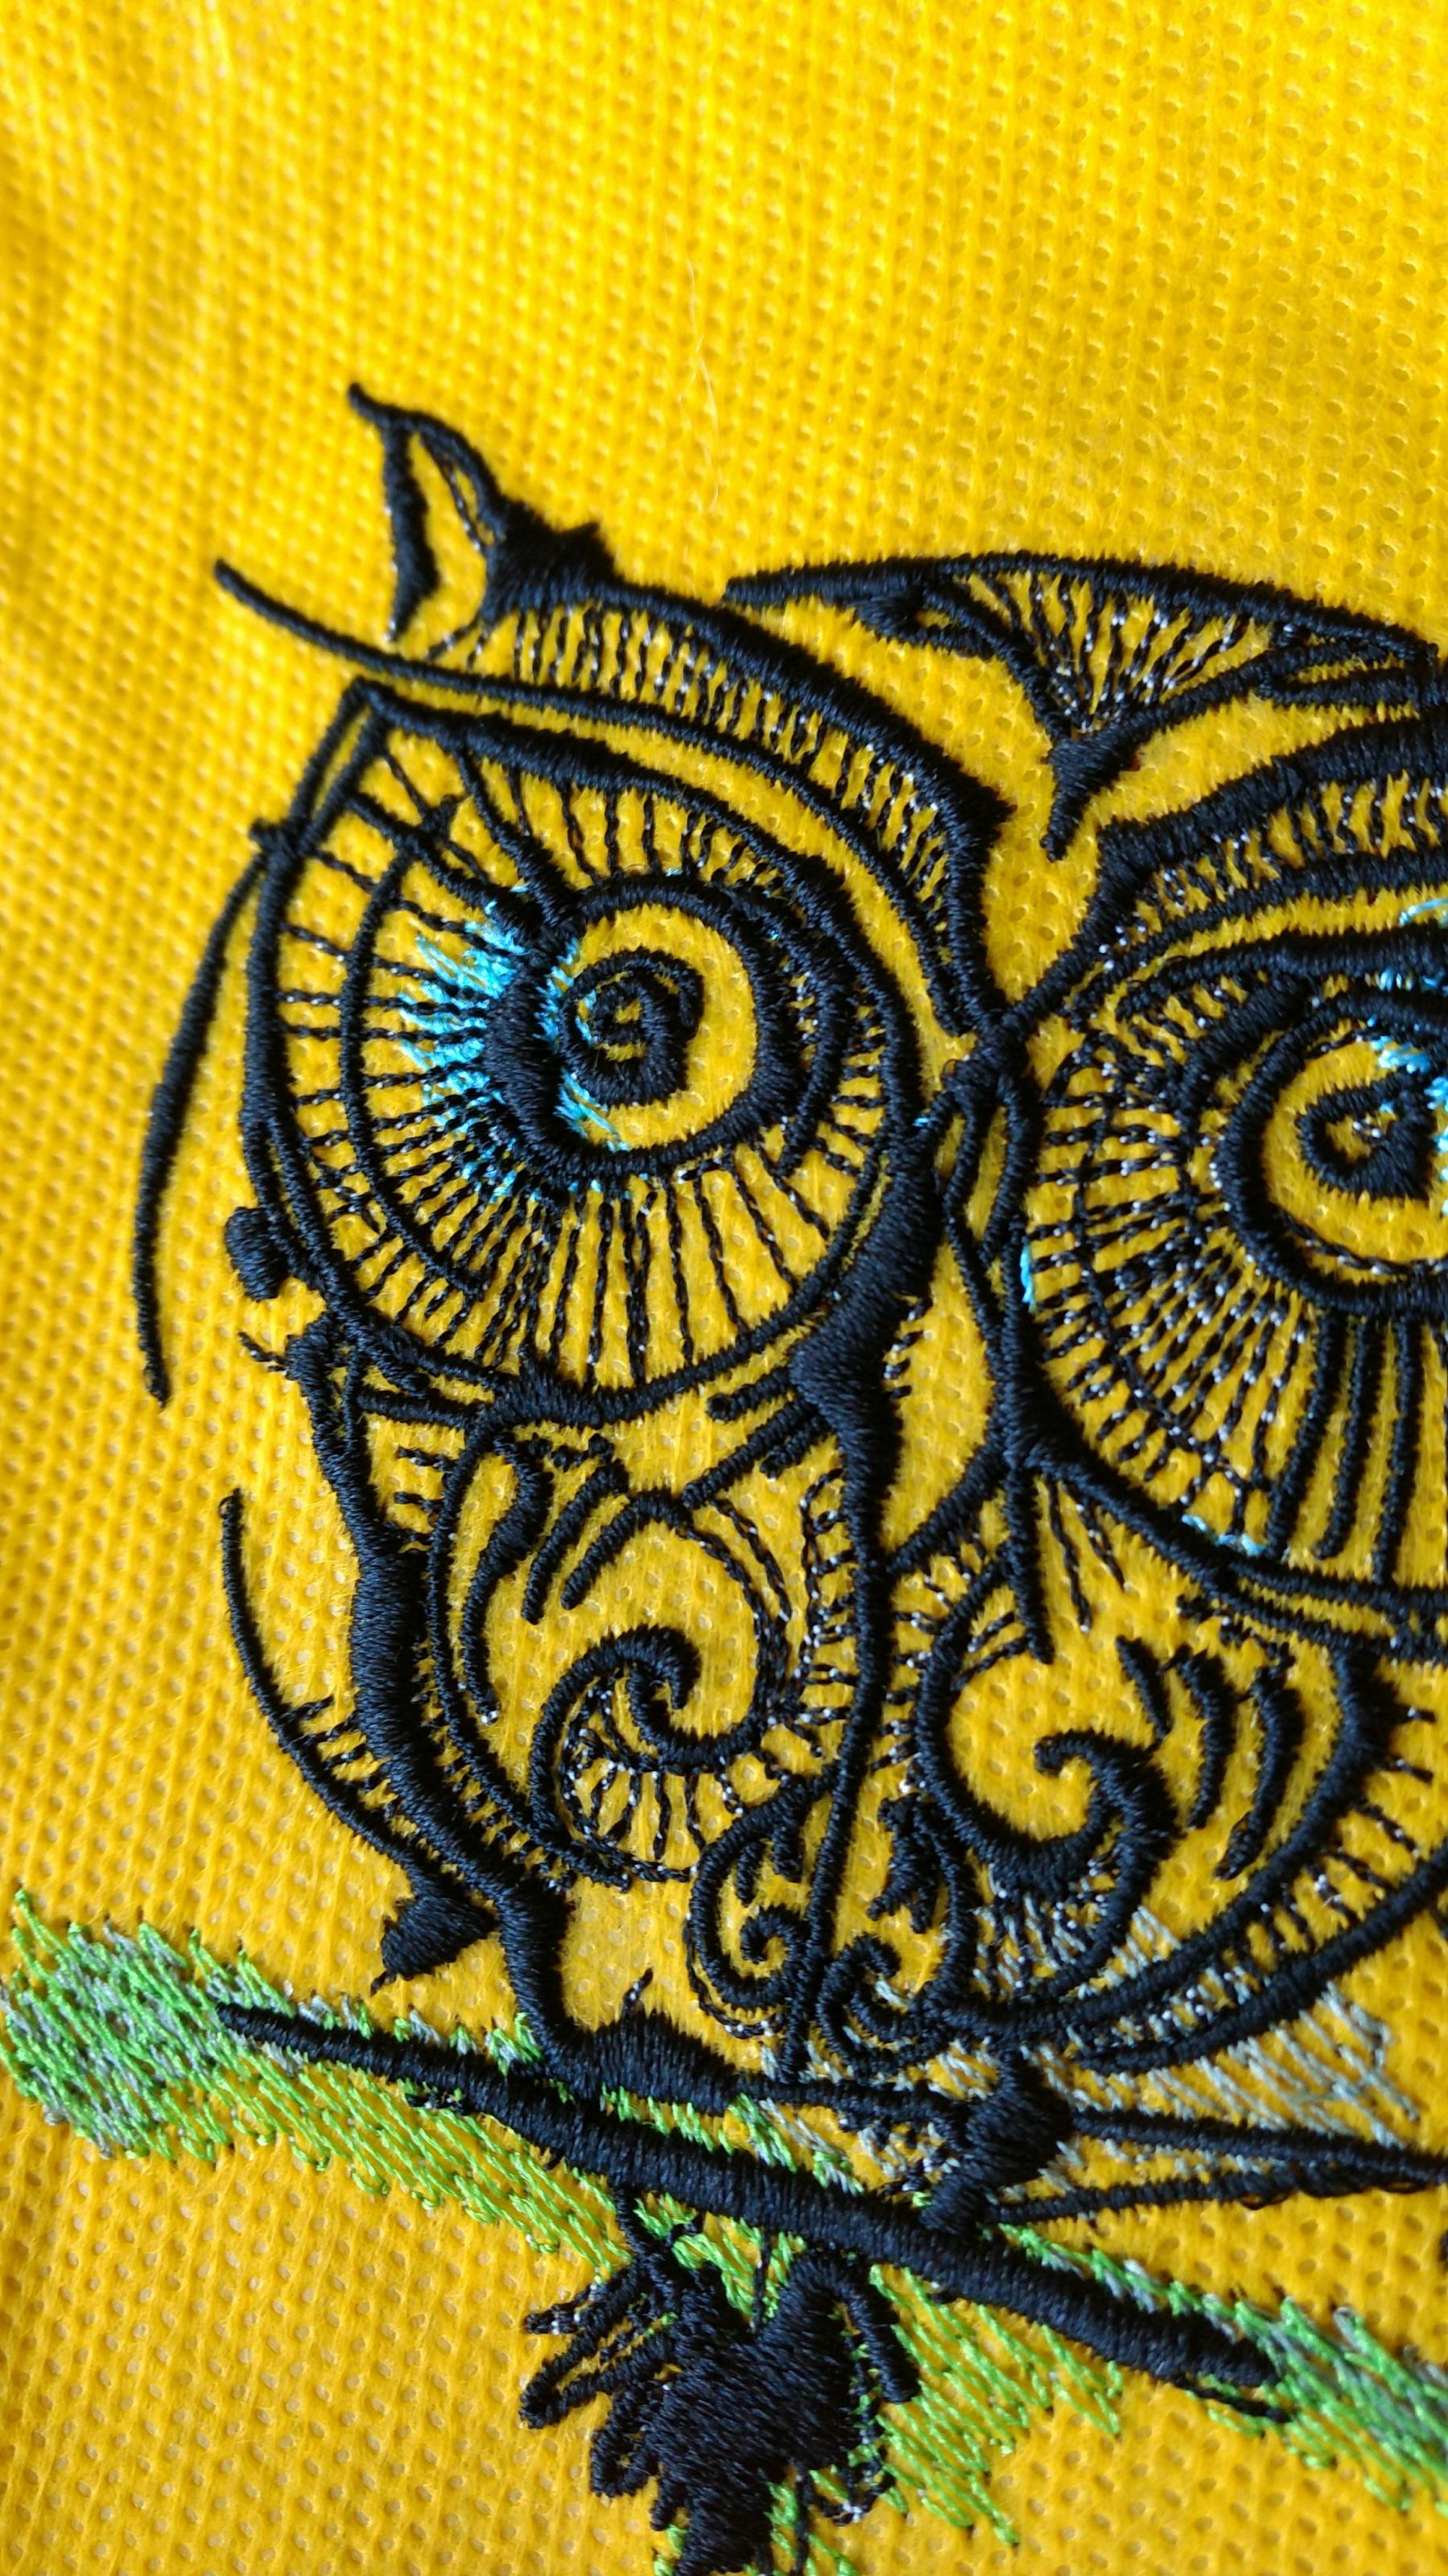 Owl Embroidery Pattern Fragment Of Big Eyes Owl Embroidery Design Showcase With Fauna